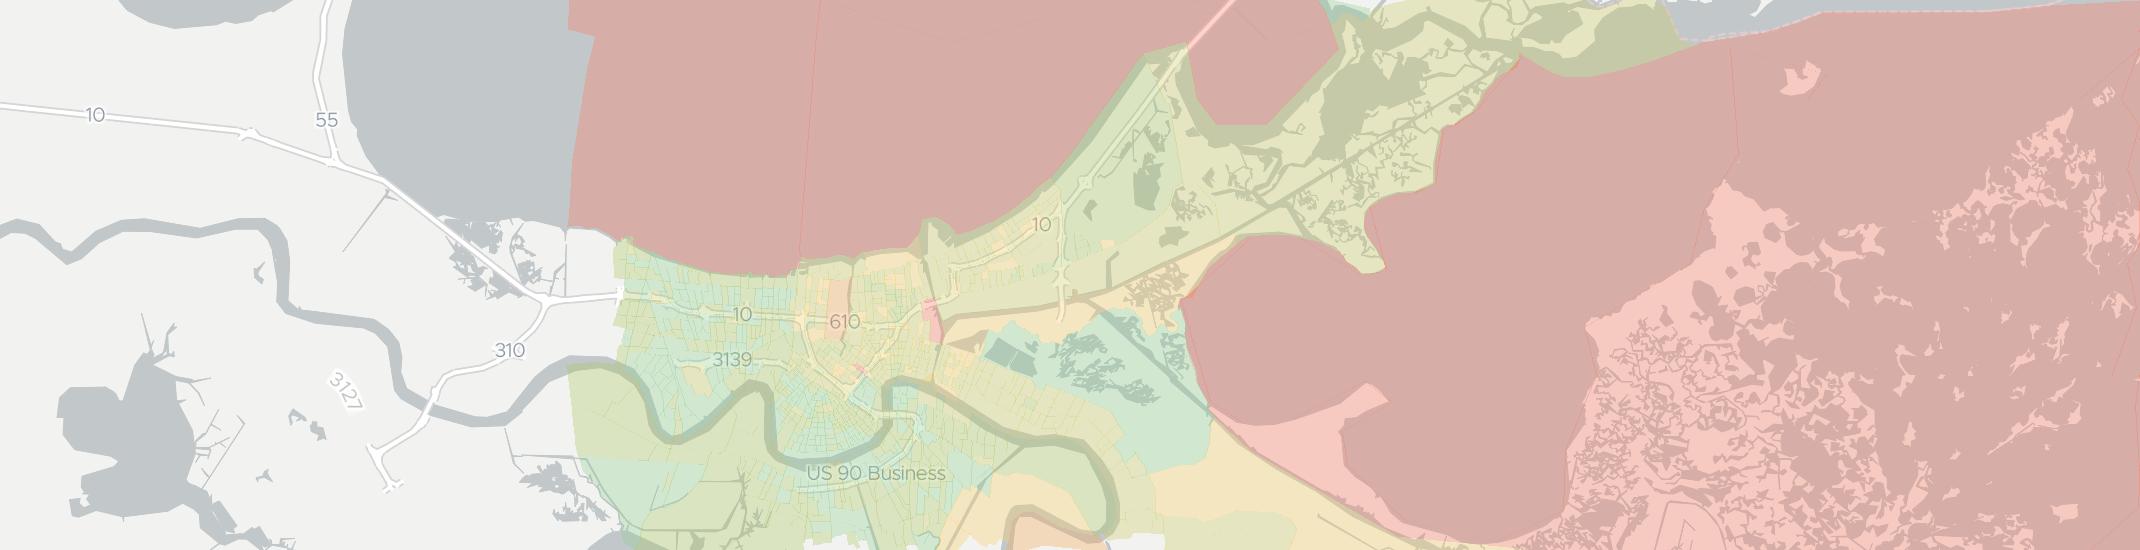 New Orleans Internet Competition Map. Click for interactive map.